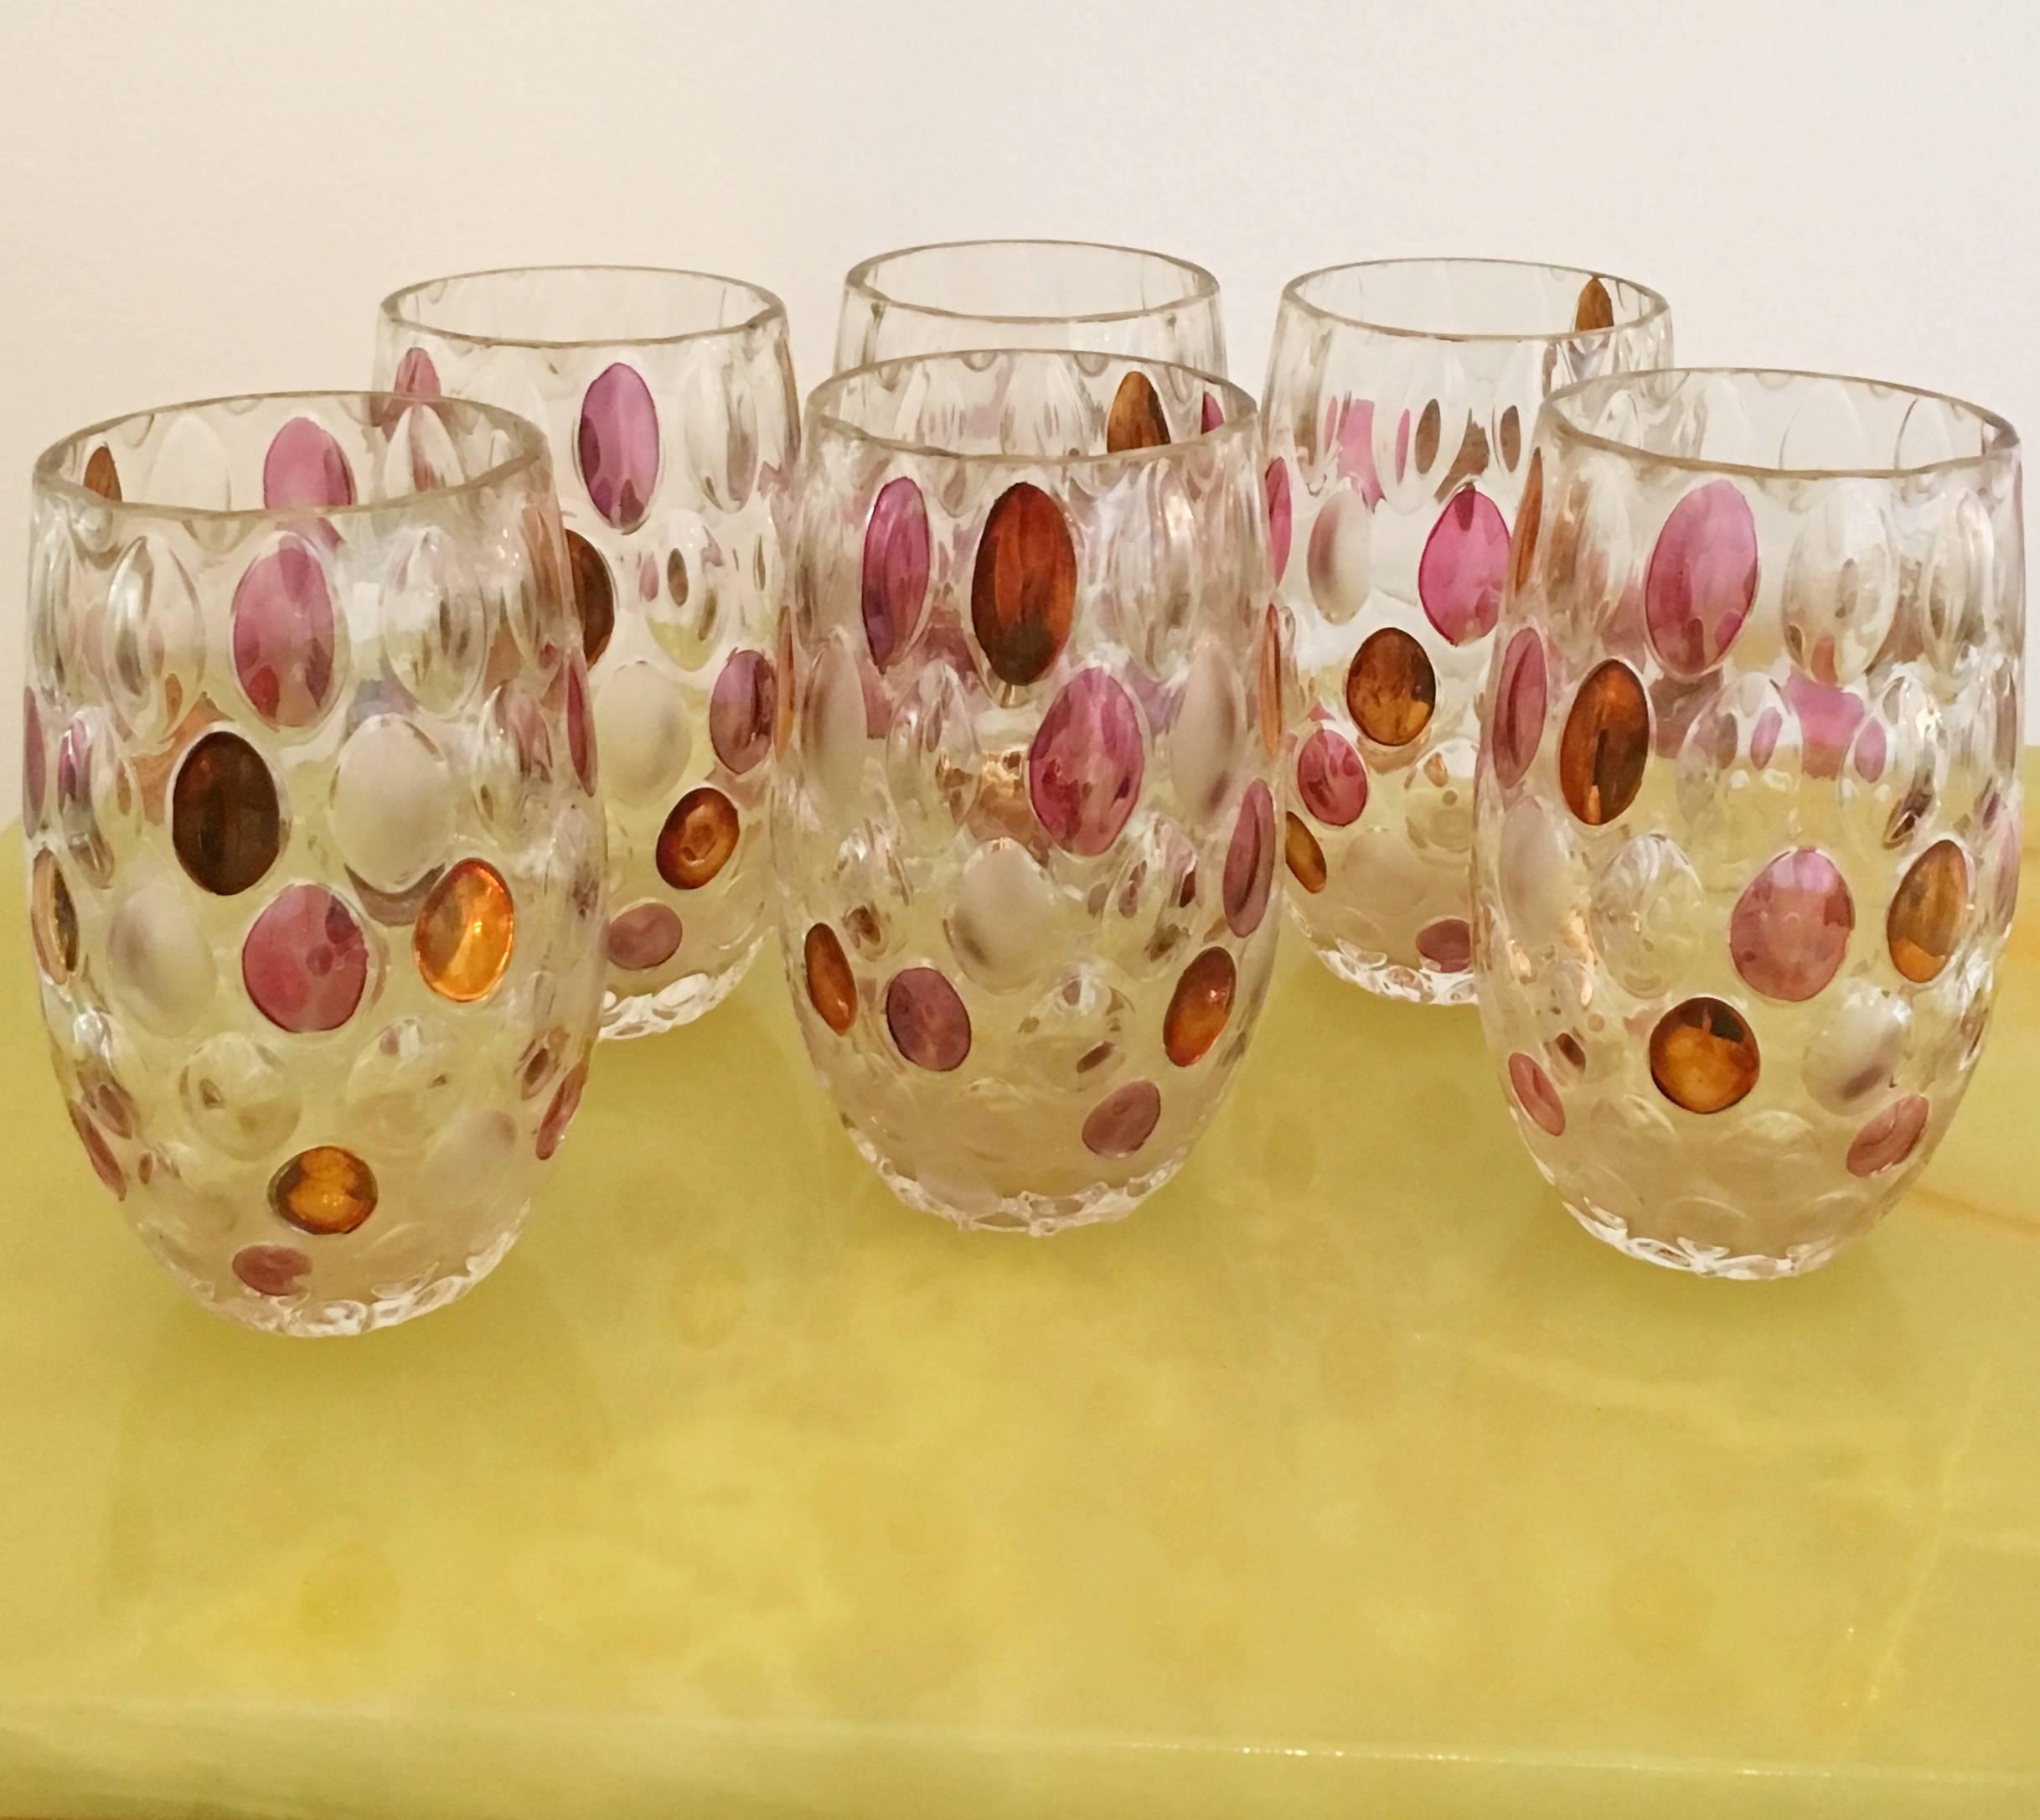 The set of molded drink glasses in clear glass with oval dot decoration randomly colored in gold/copper, amethyst and frosted glazes. Produced by the Czech glass company Borske Sklo National Corporation, a union of the leading national glass